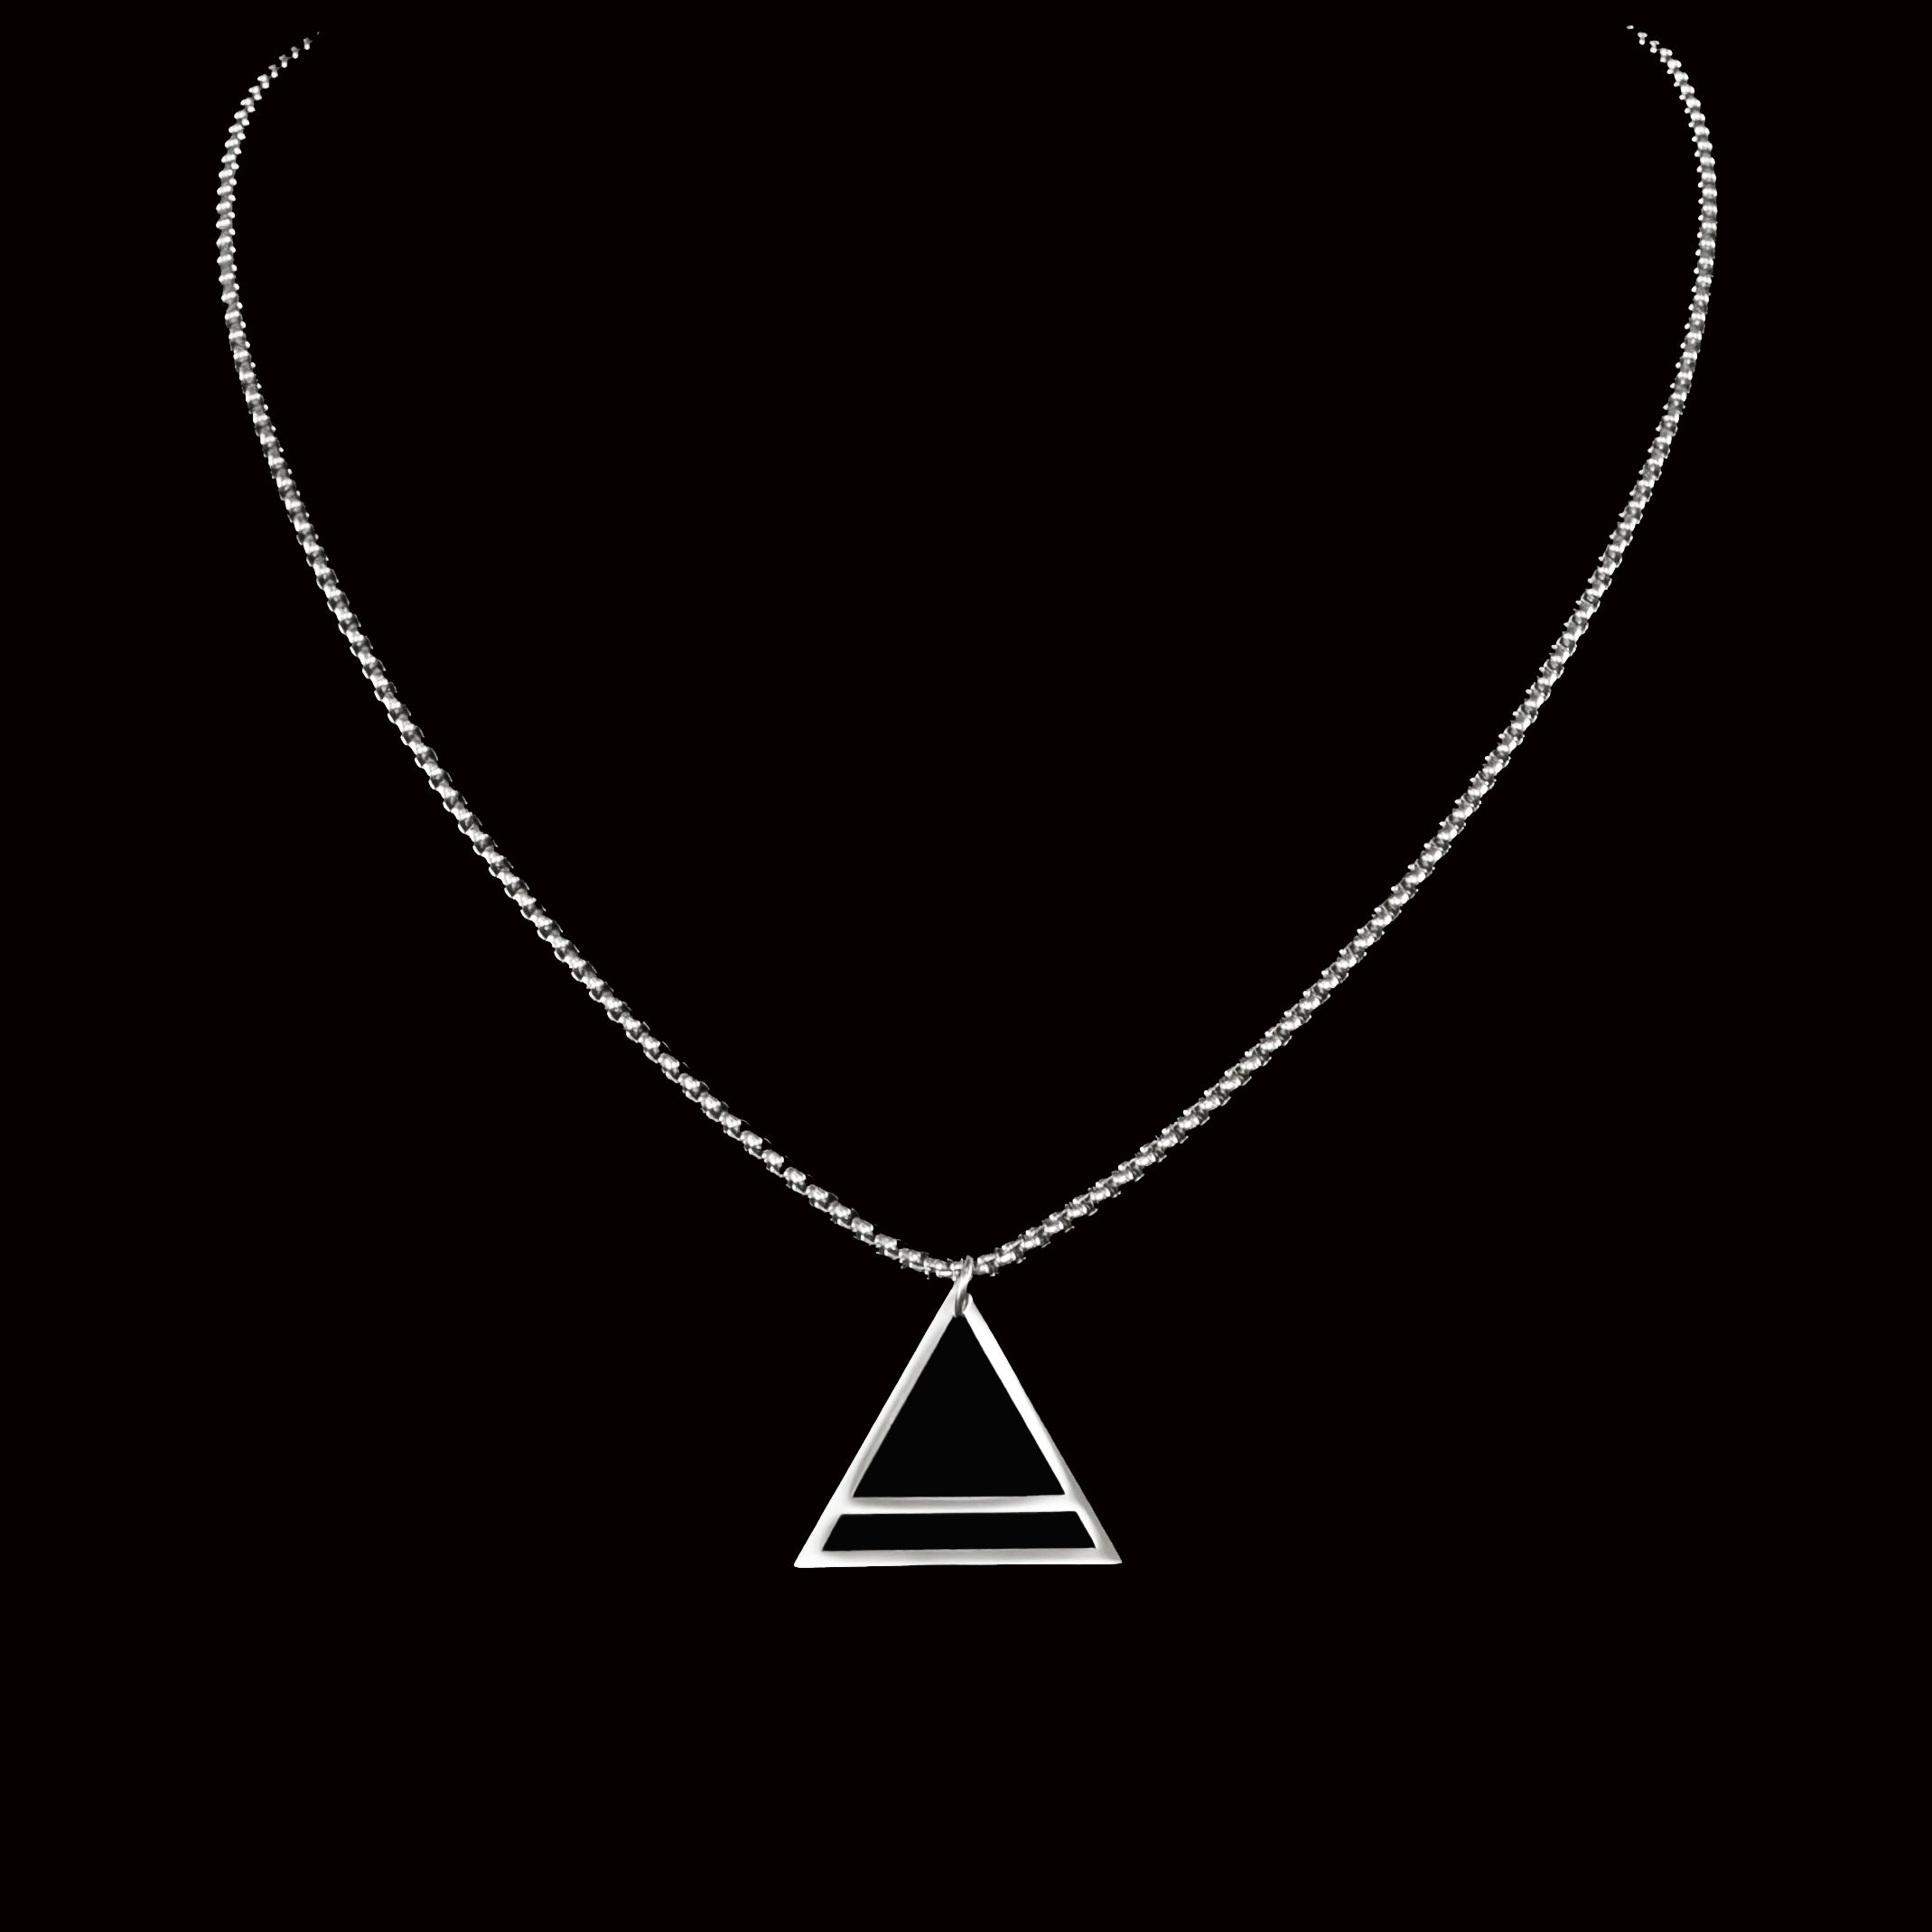 Kenryk Stainless Steel Necklace with Triangle Pendant